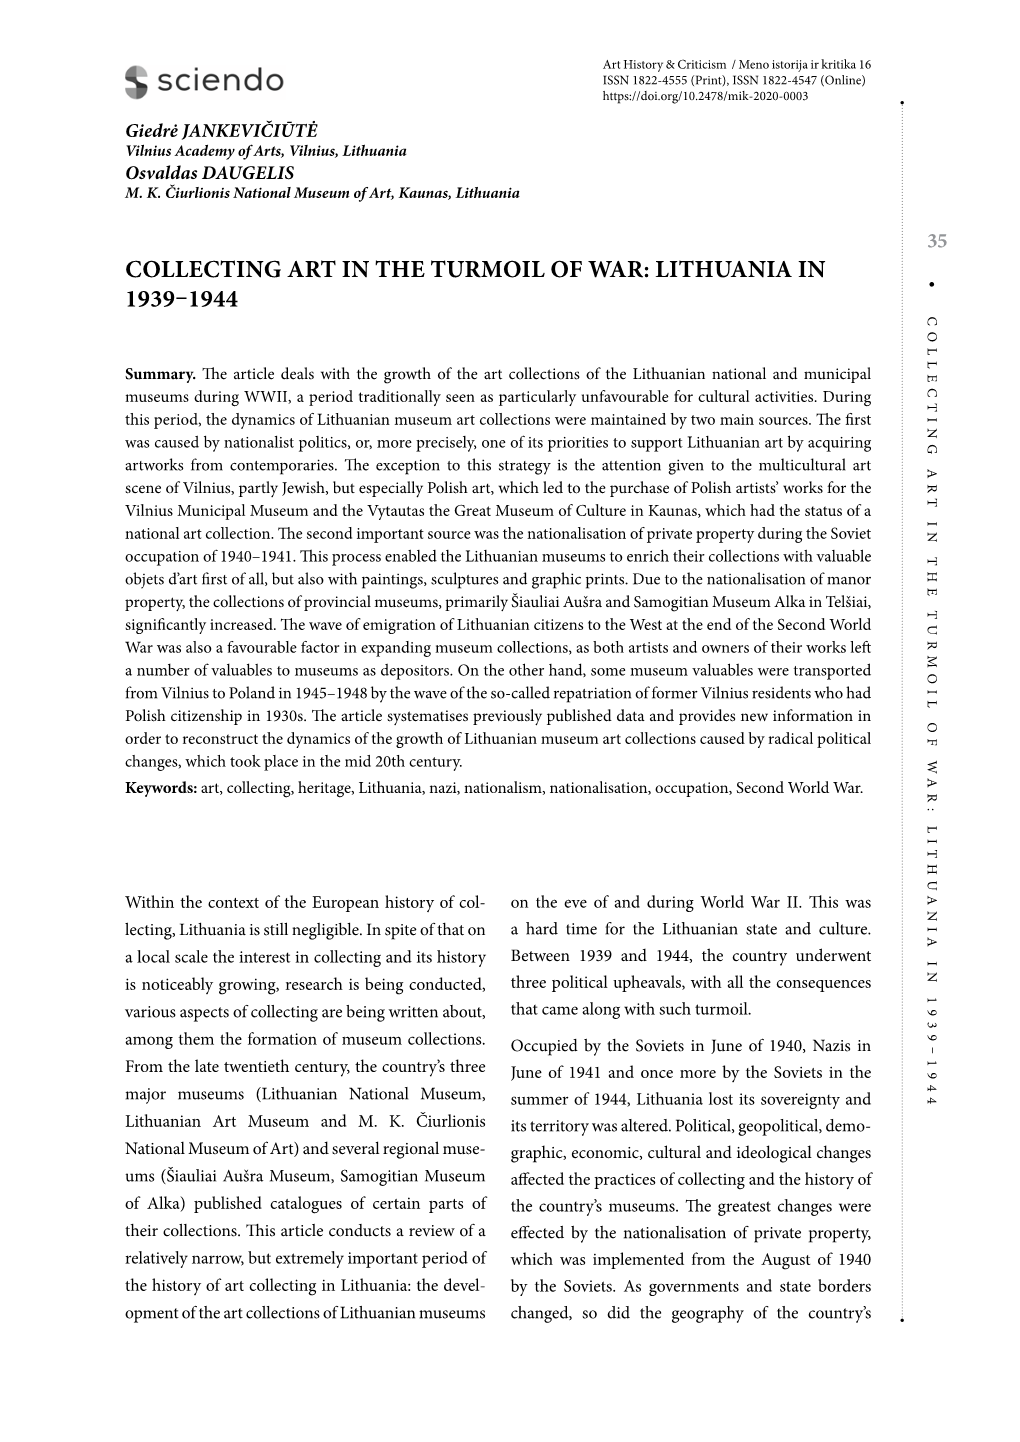 Collecting Art in the Turmoil of War: Lithuania in 1939–1944 Collecting Art in the Turmoil of War: Lithuania in 1939–1944